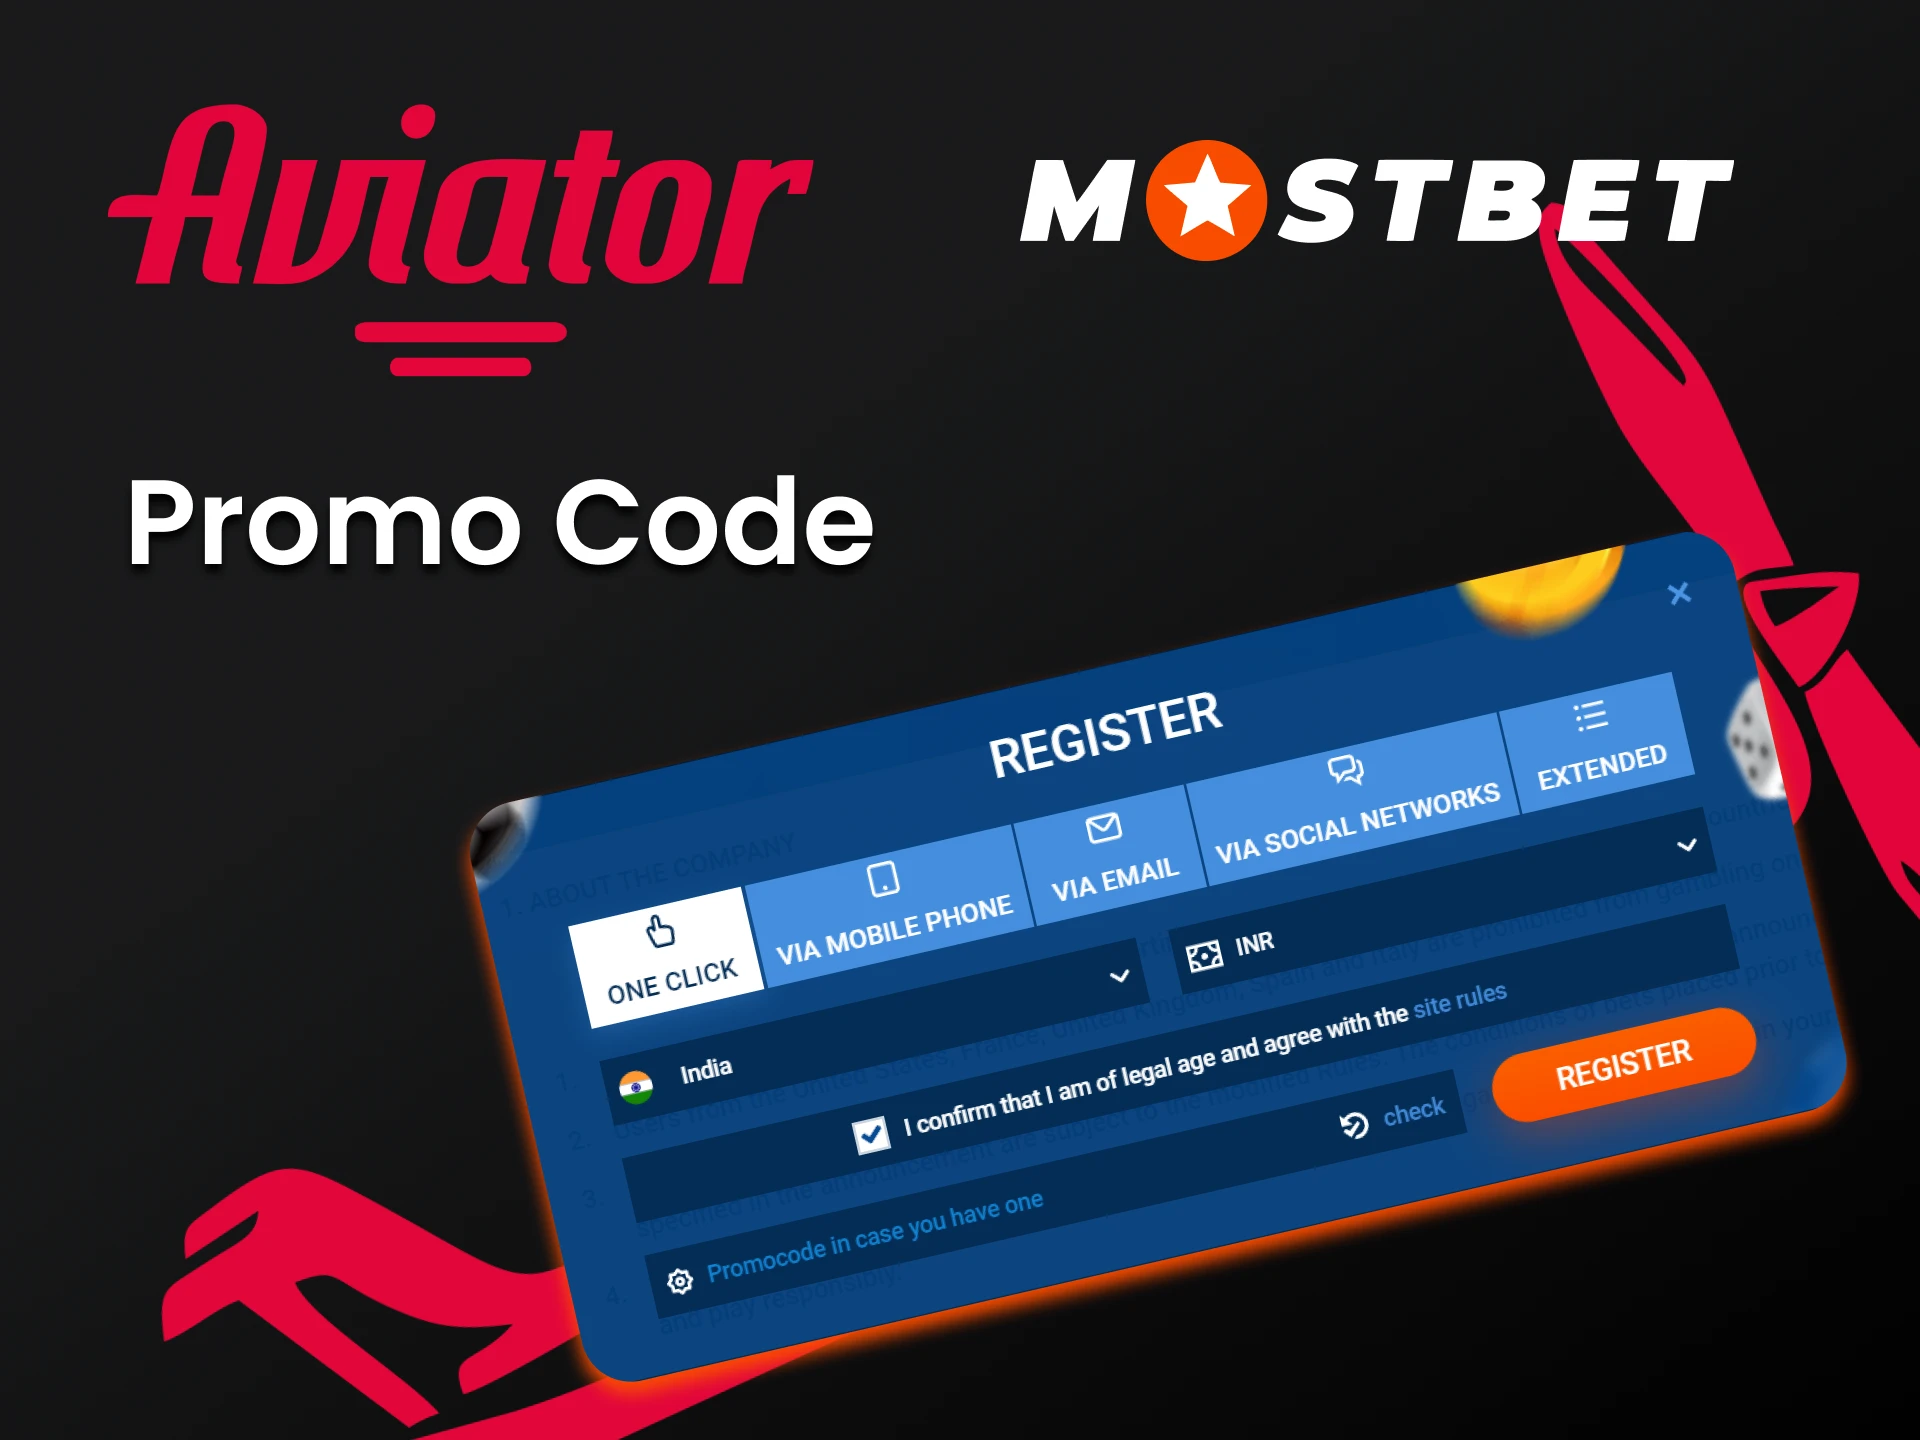 Enter the promo code to receive an additional bonus from Mostbet.